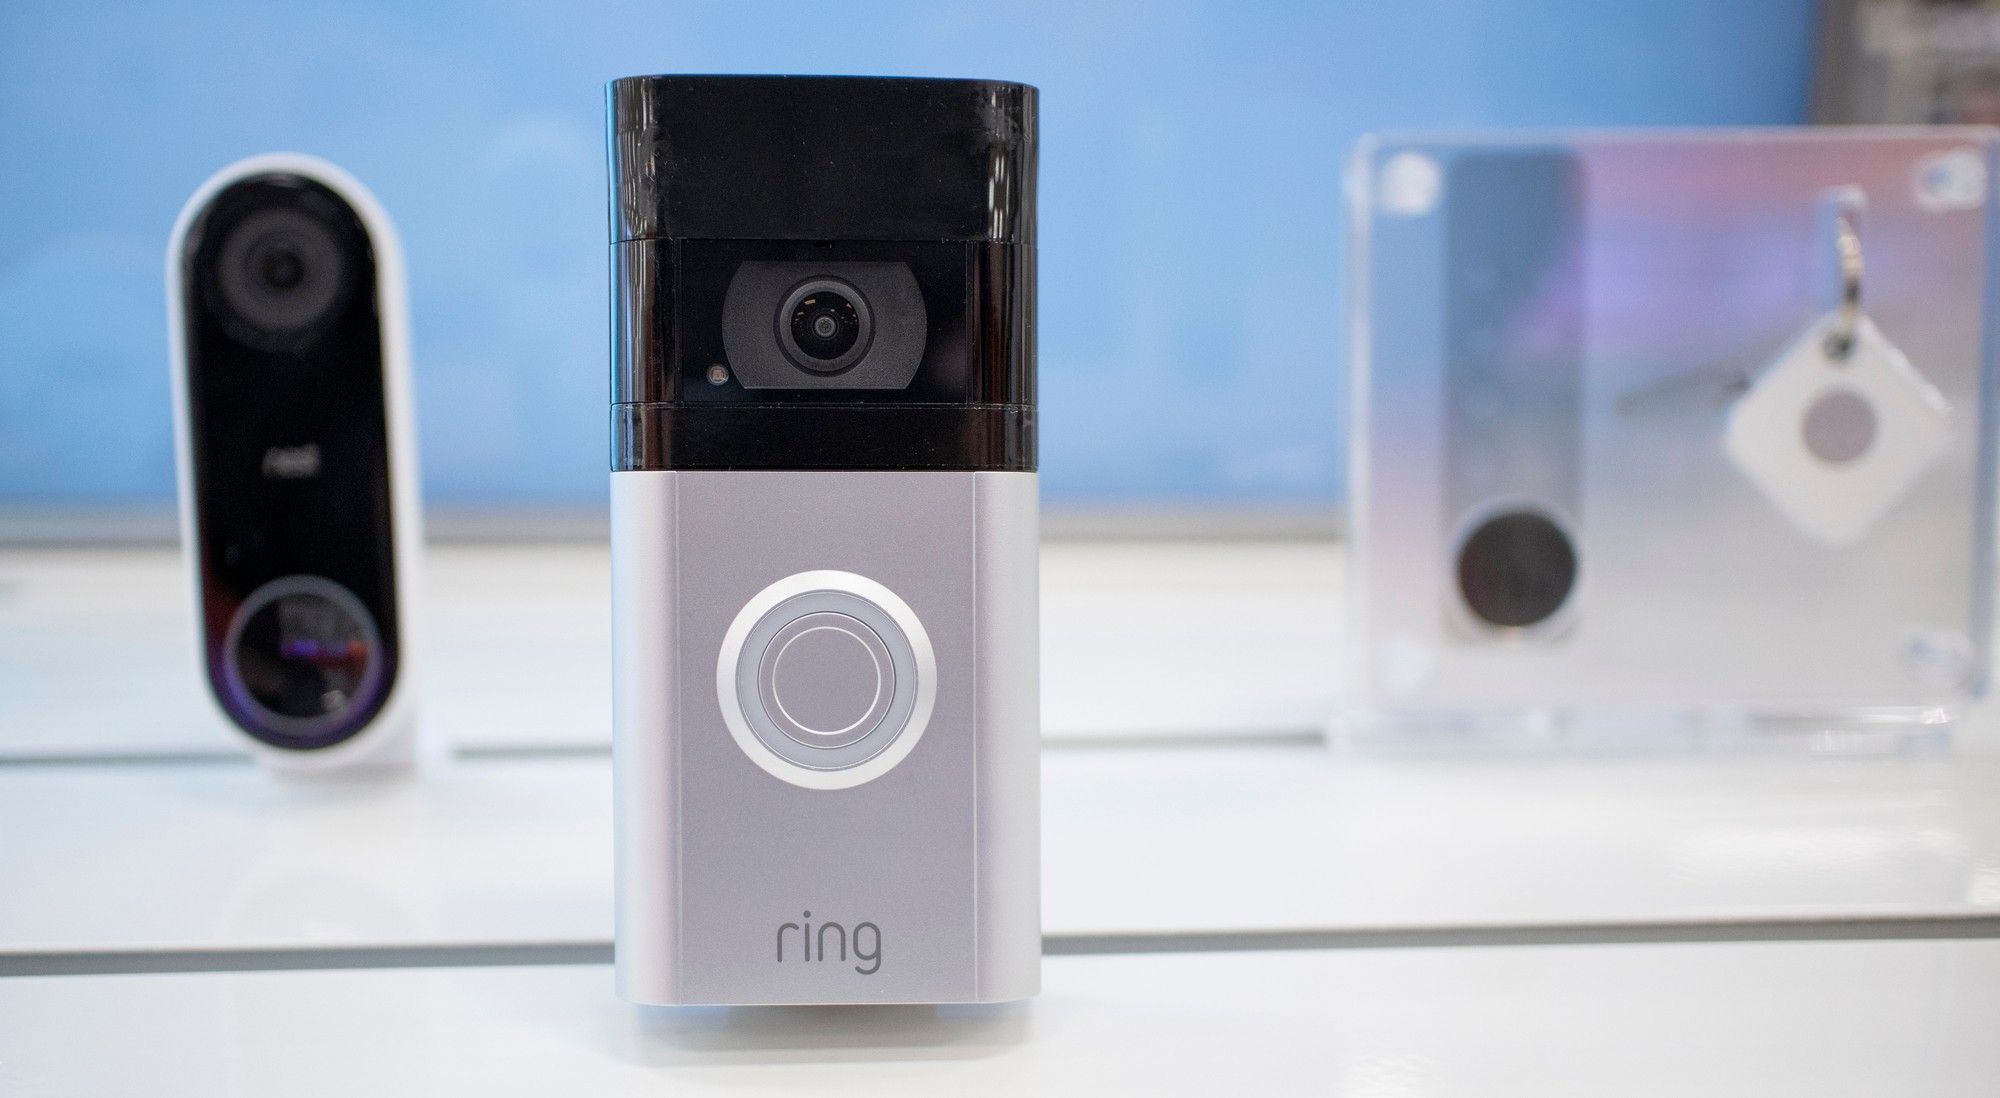 Police can get  Ring footage without permission, which raises privacy  concerns - Vox